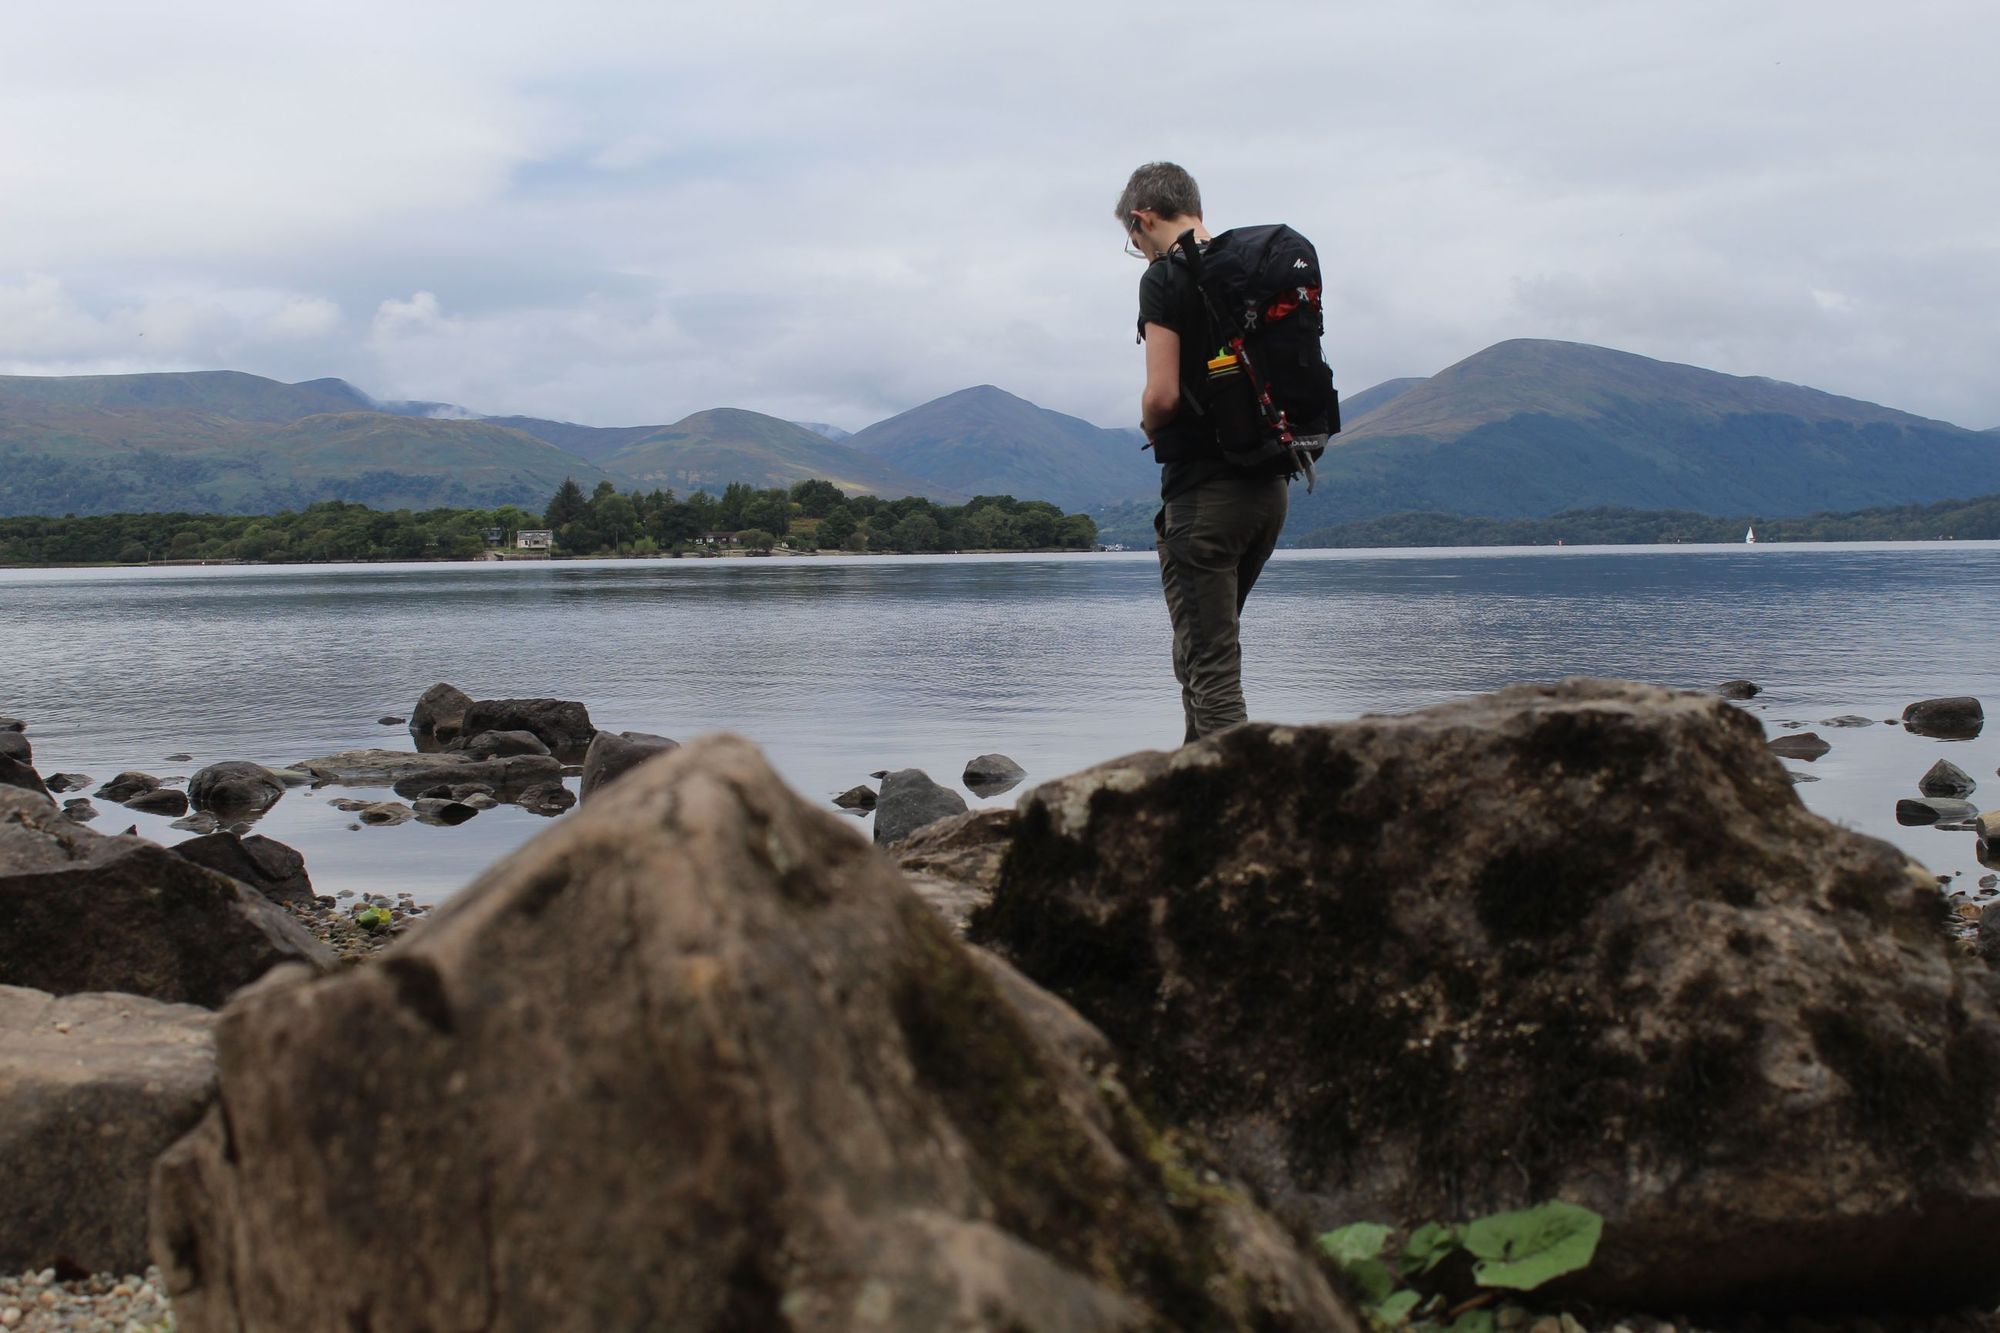 A hiker standing on the shore of Loch Lomond